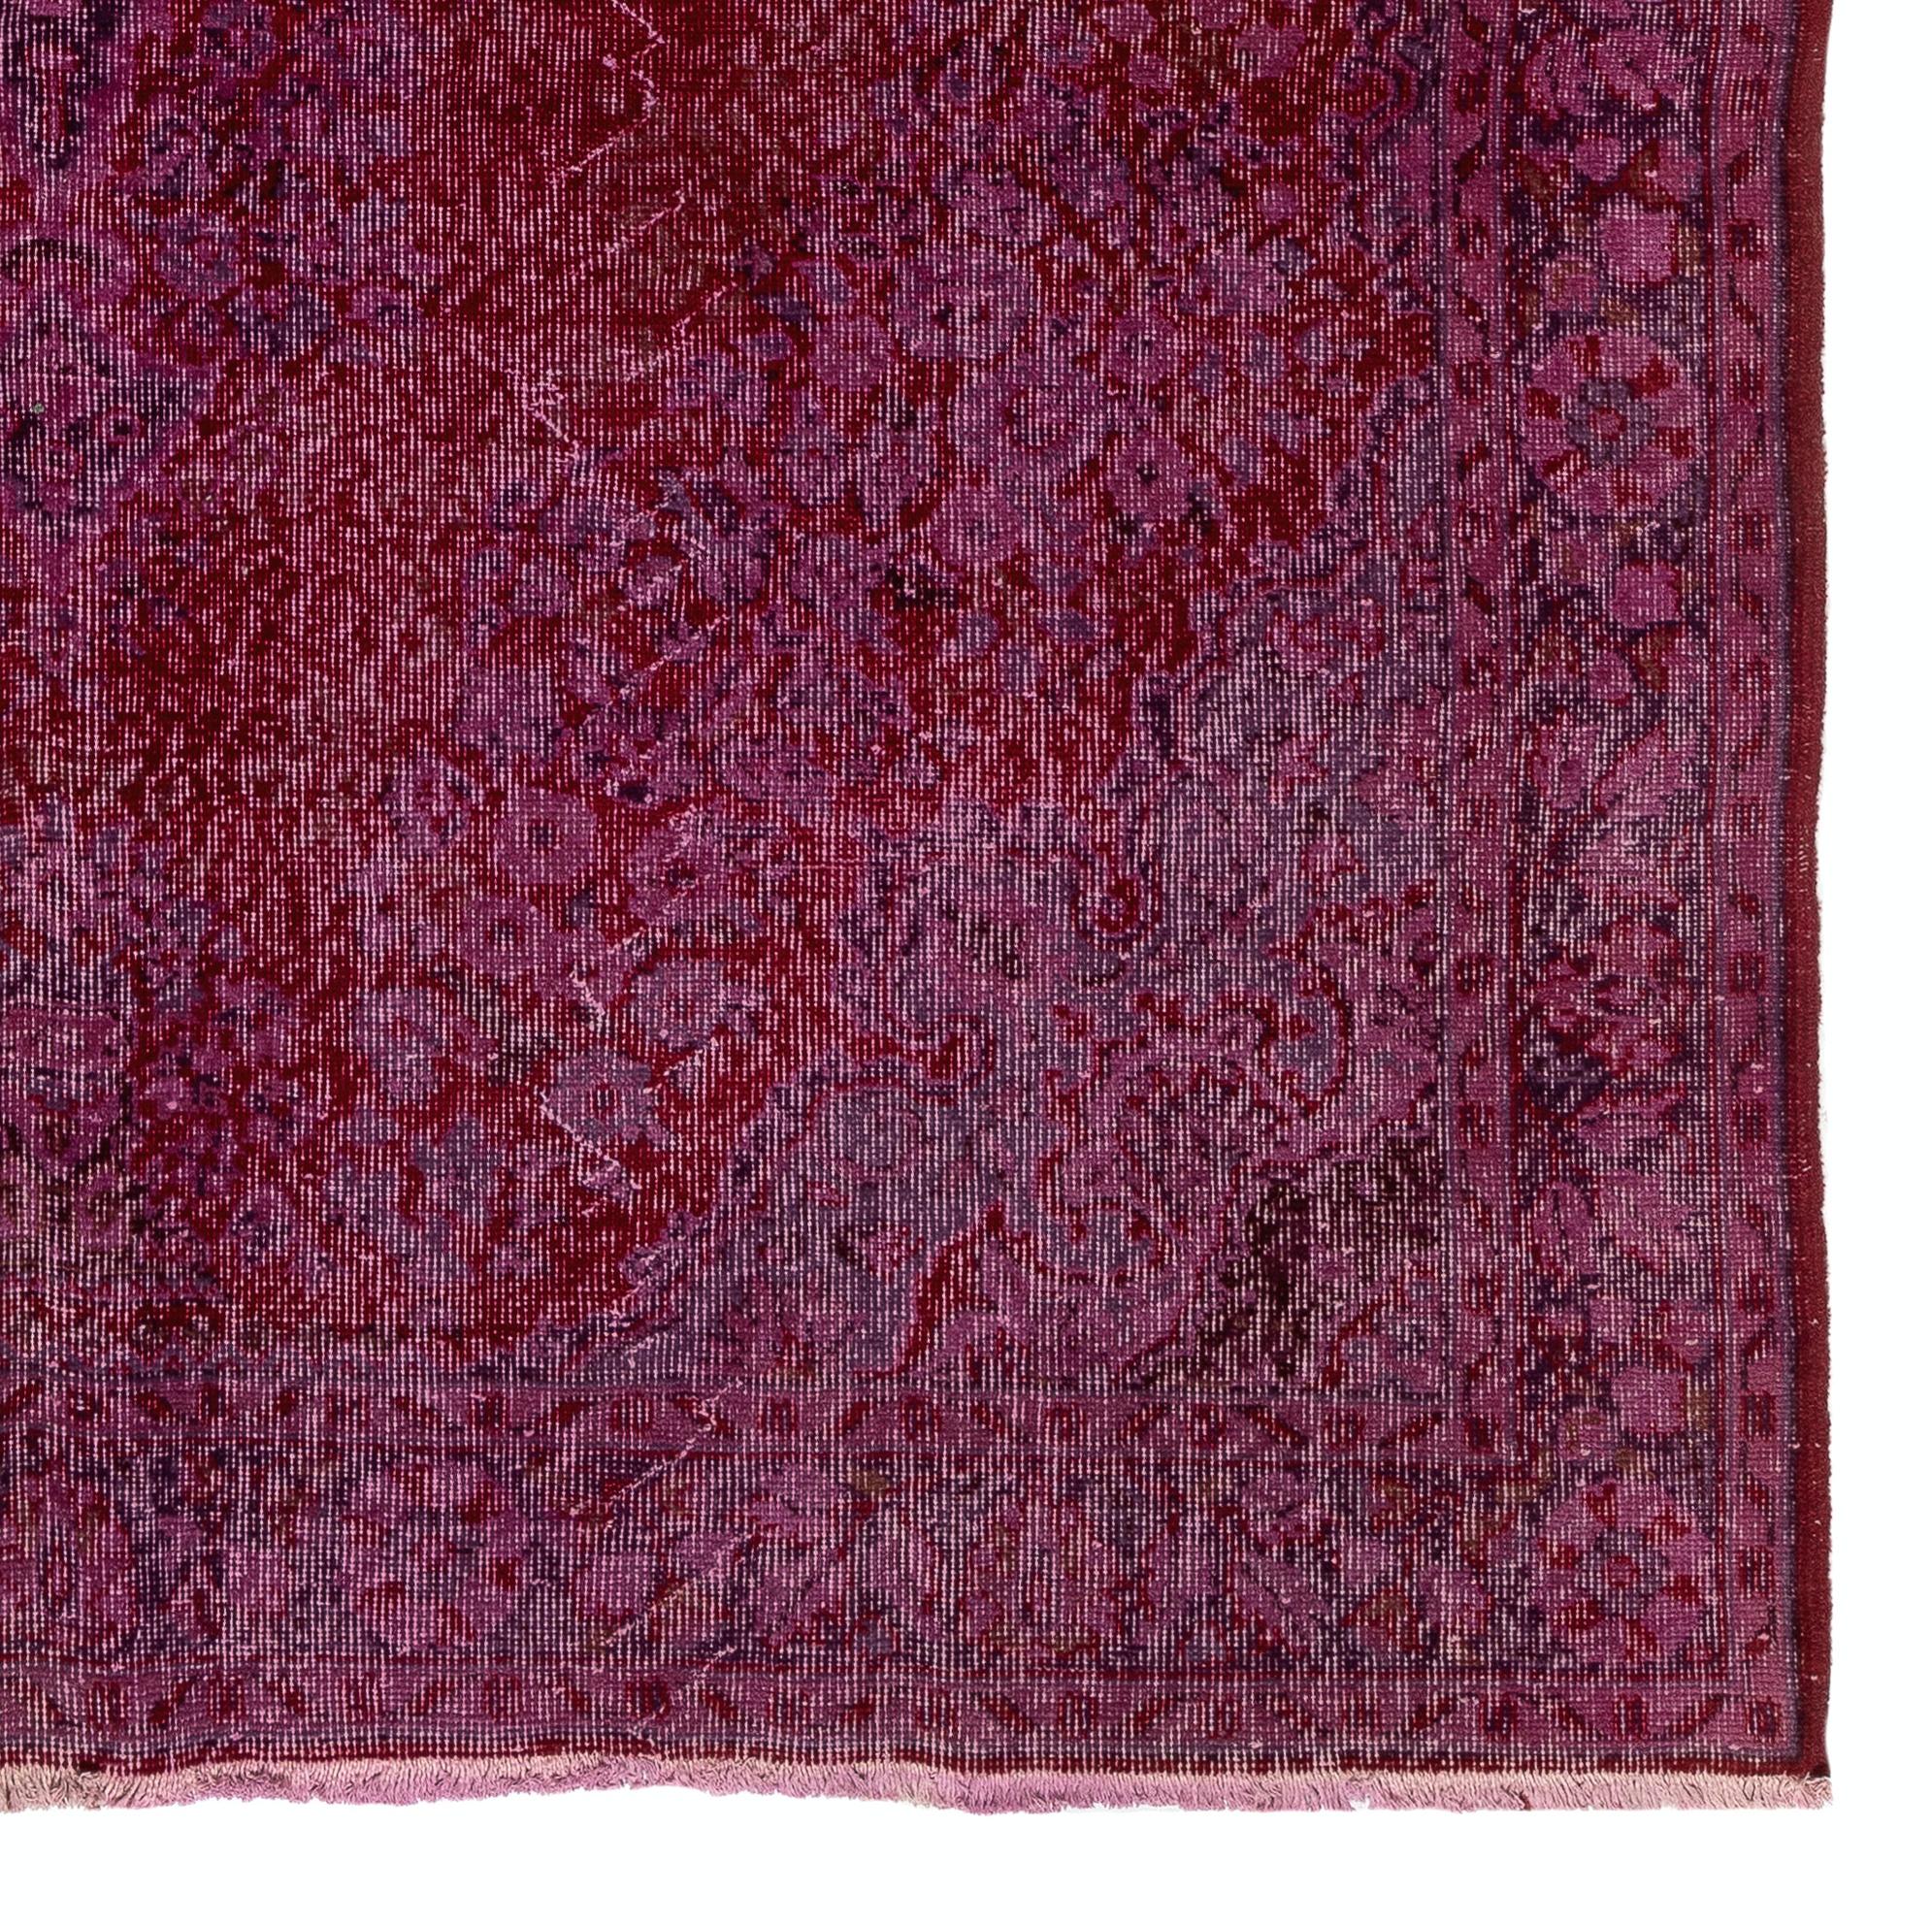 7x10.2 Ft Vintage Hand-knotted Over-dyed Turkish Wool Rug in Burgundy Red In Good Condition For Sale In Philadelphia, PA